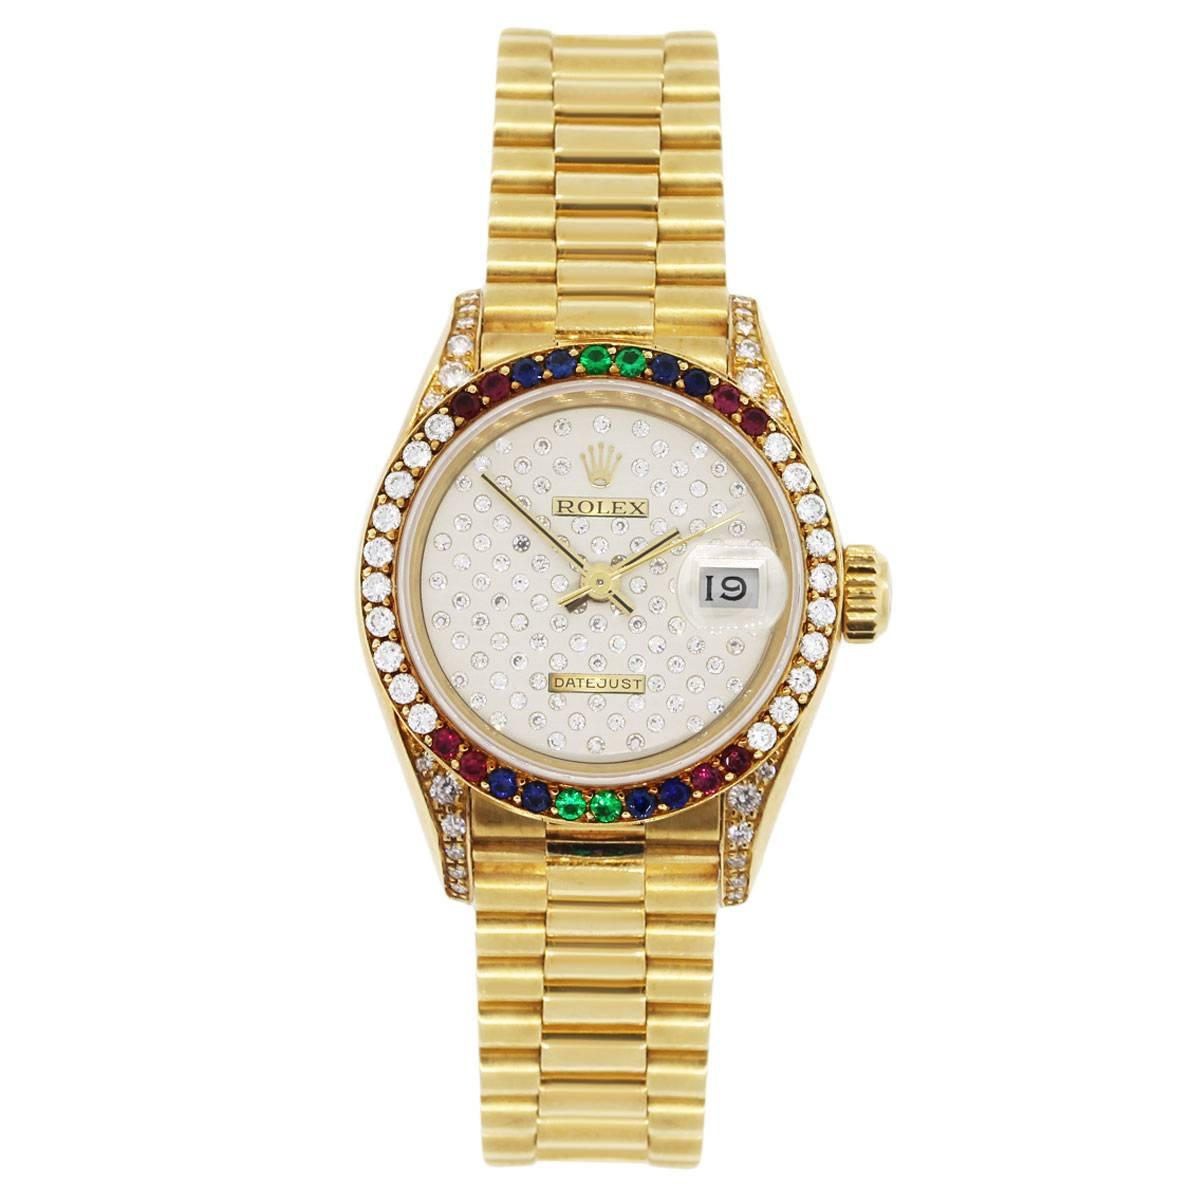 Brand: Rolex
MPN: 69038
Model: Datejust
Case Material: 18k yellow gold
Case Diameter: 26mm
Crystal: Scratch resistant sapphire
Bezel: Round shape diamond, ruby, emerald and sapphire bezel (factory)
Dial: Very rare champagne pleade diamond dial with